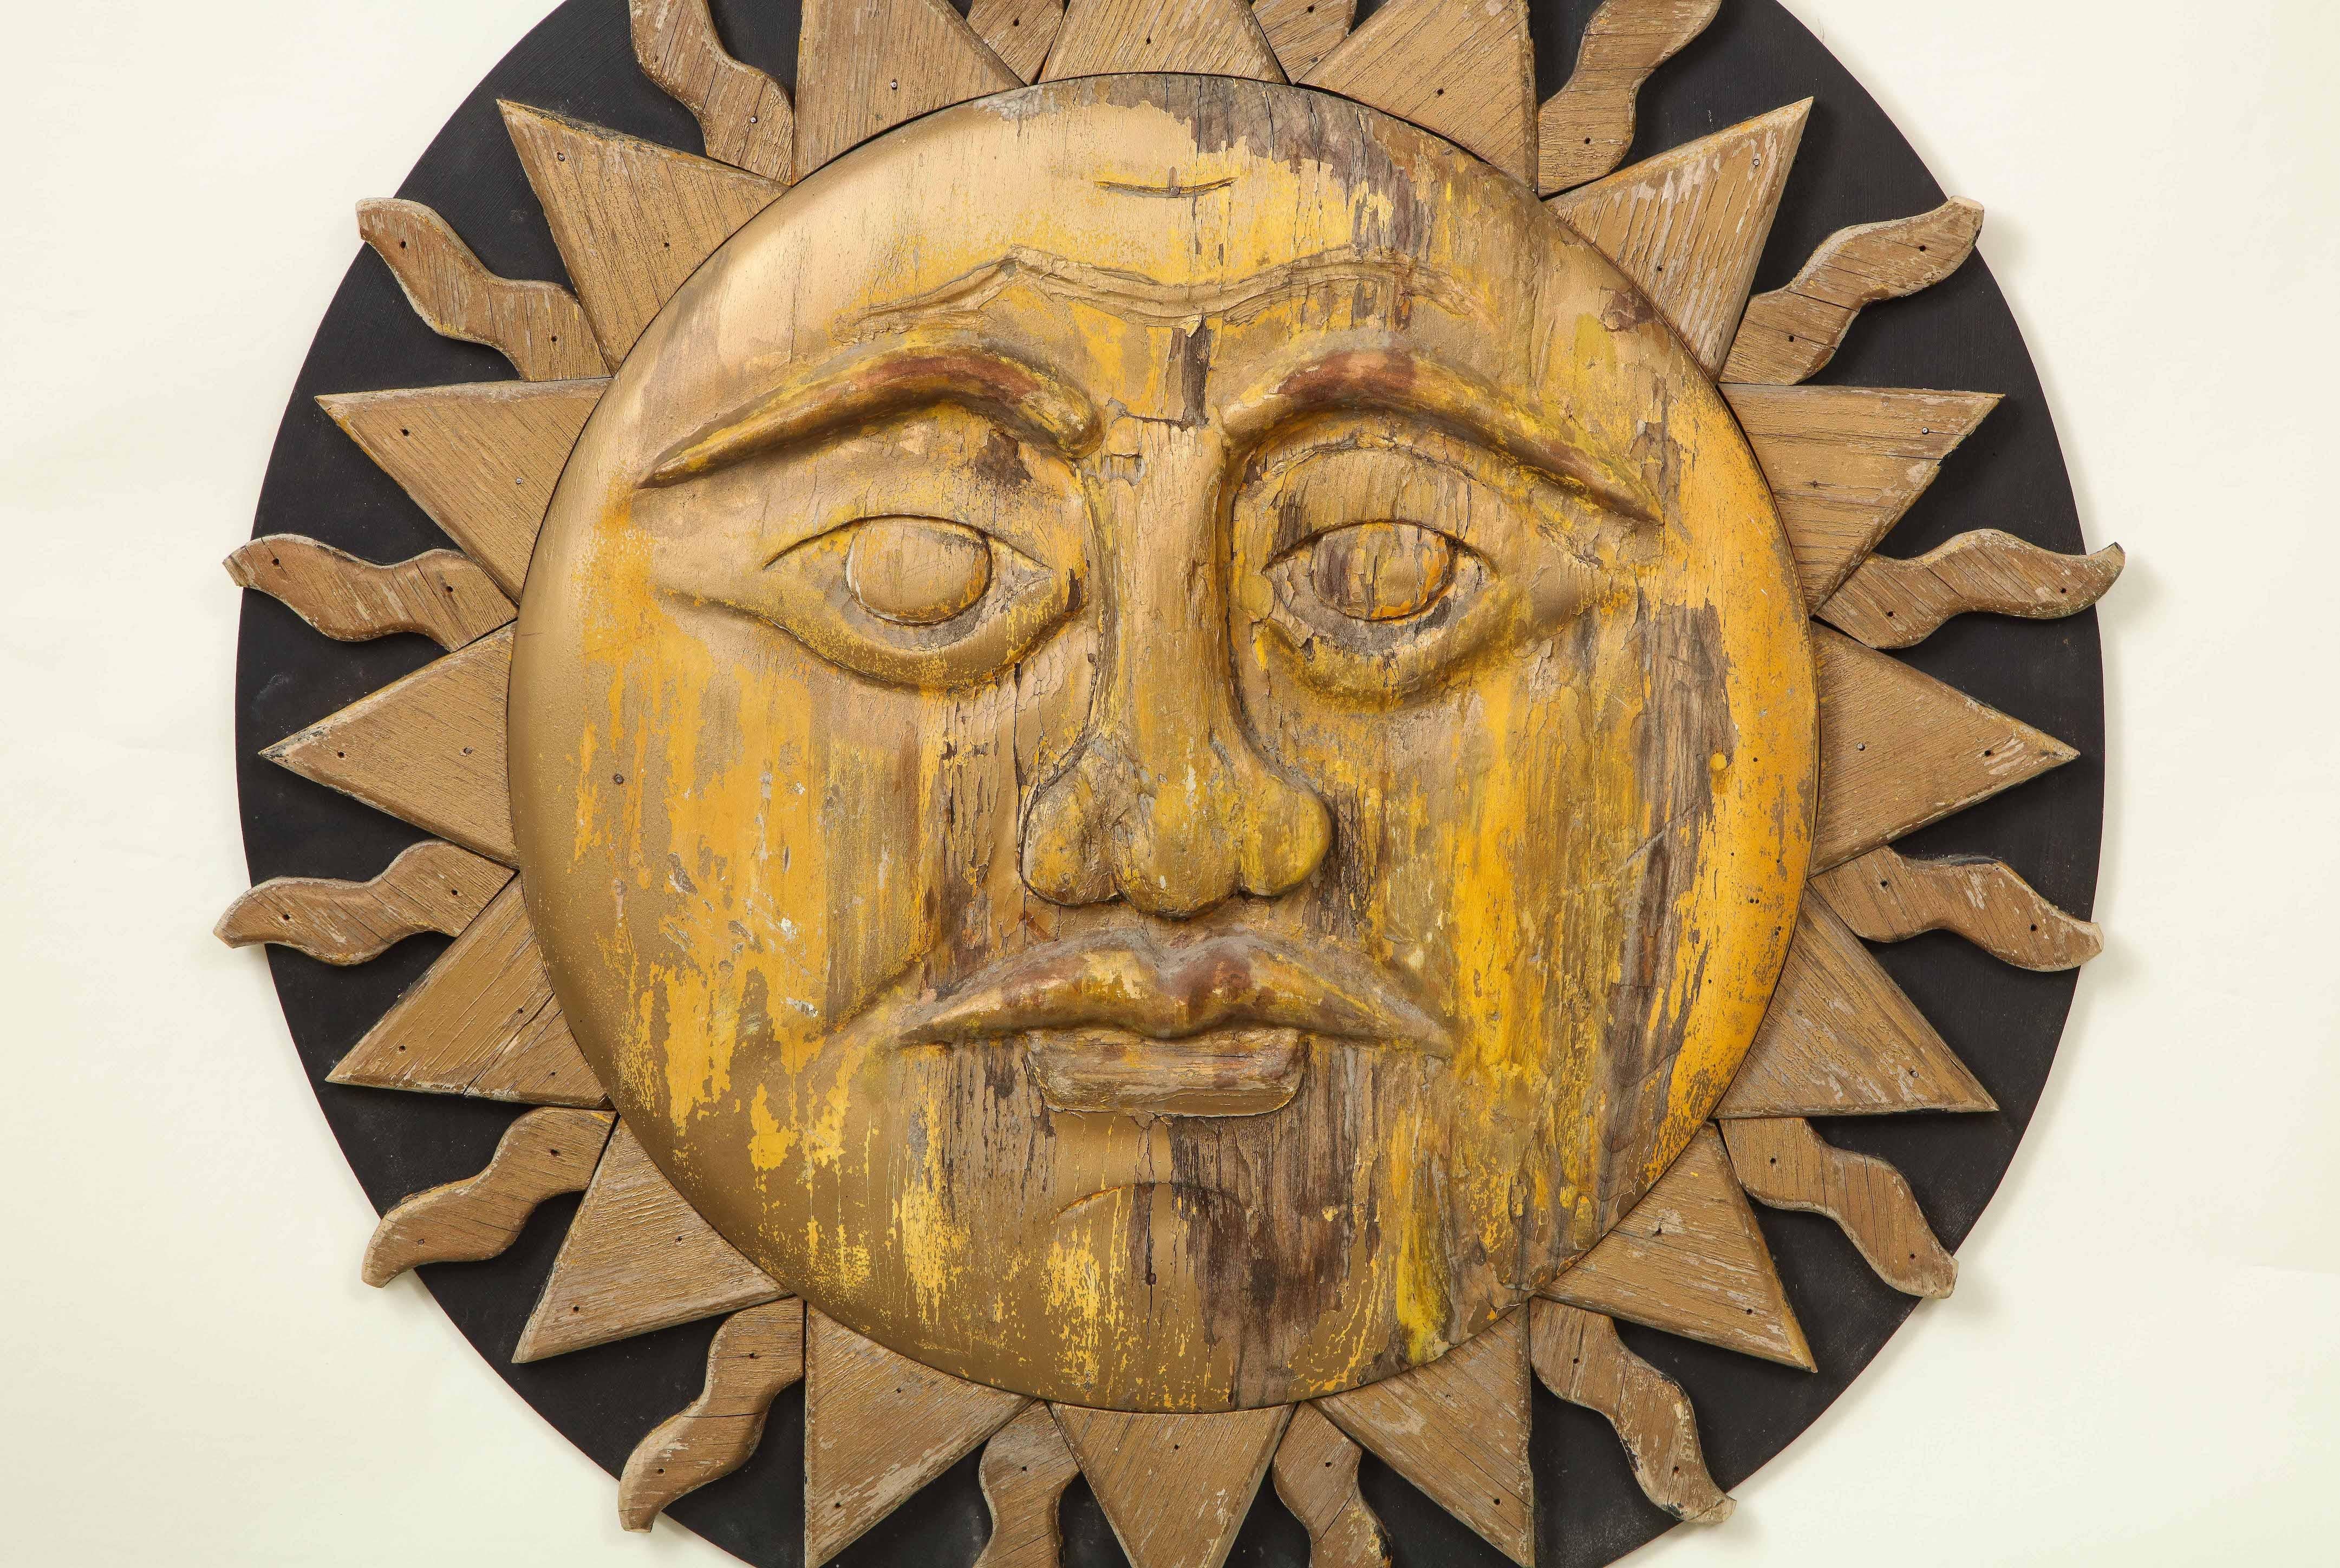 Exuberantly carved sunburst mounted on a black roundel.

Provenance: From the Collection of Mario Buatta, New York, NY.